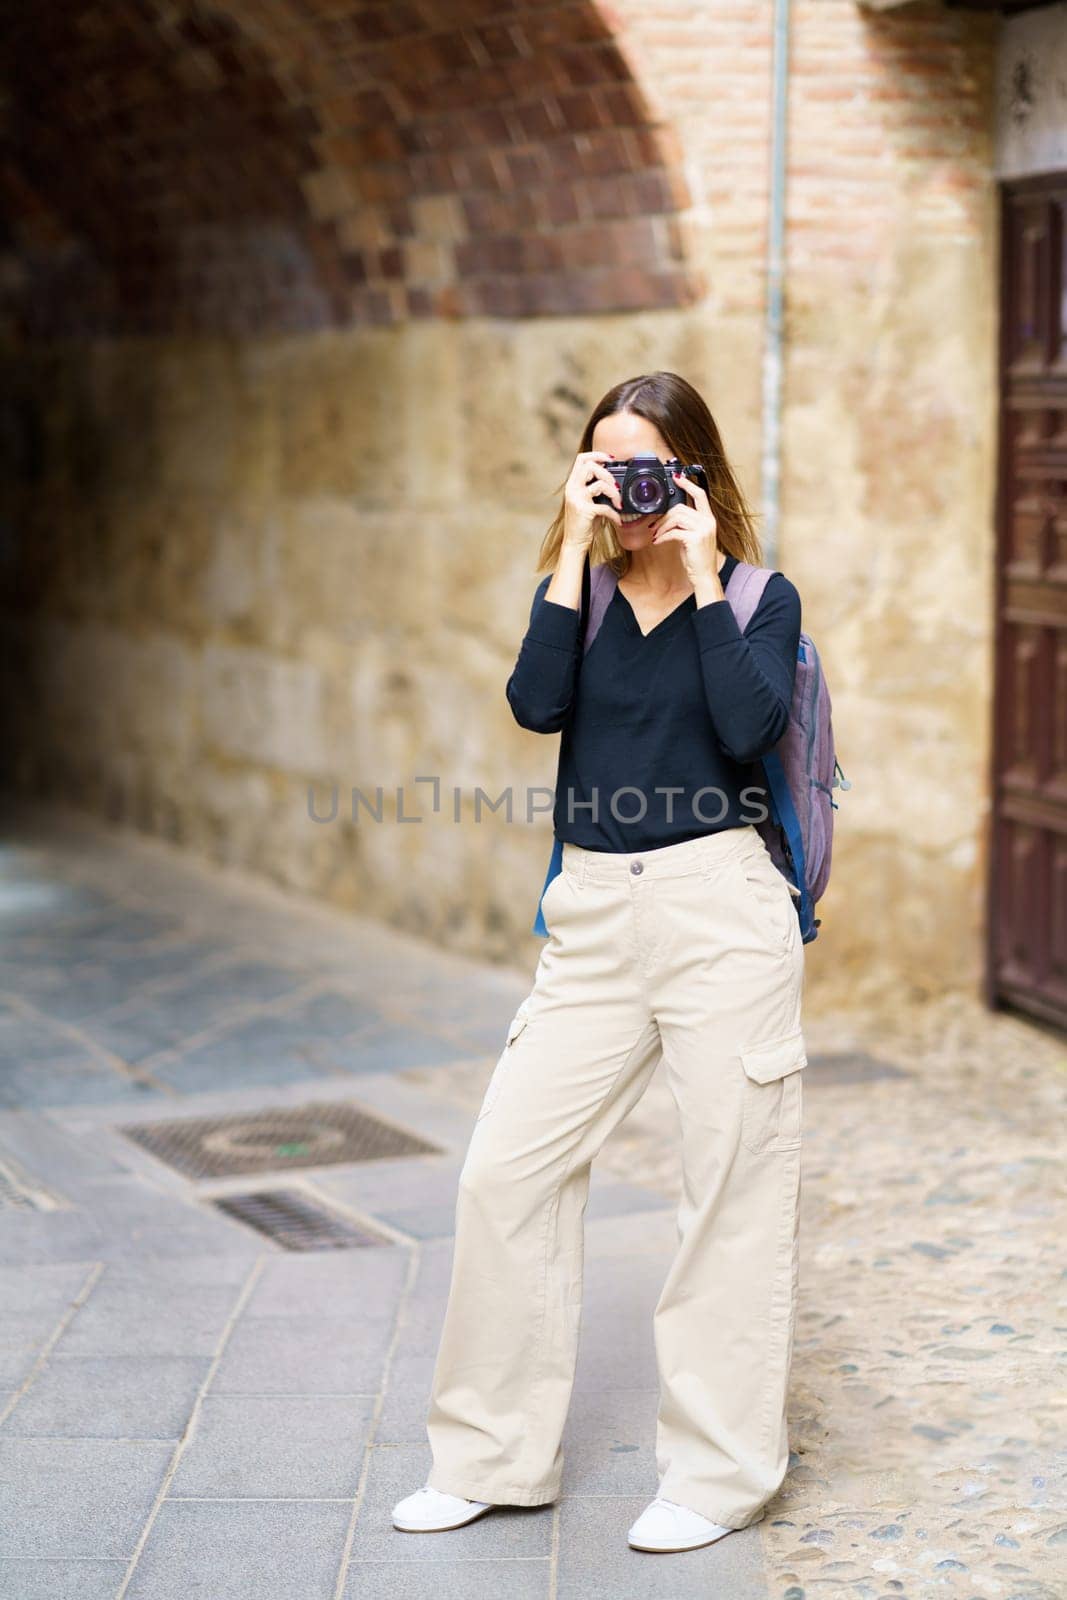 Full body of young female tourist in casual outfit with backpac,standing near aged brick building with arched passage and taking pictures on photo camera during sightseeing trip